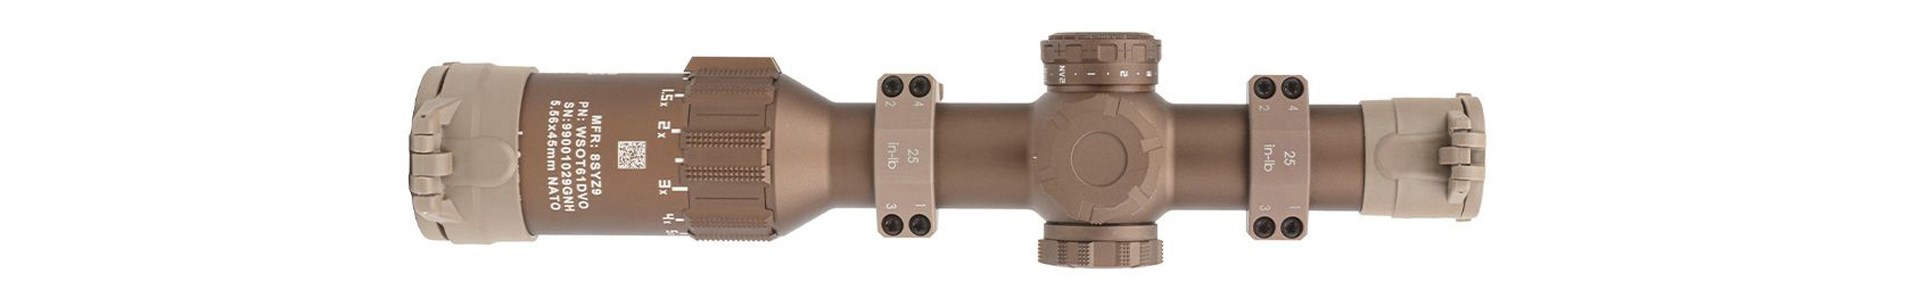 sig sauer optic riflescope top view looking down brown scope